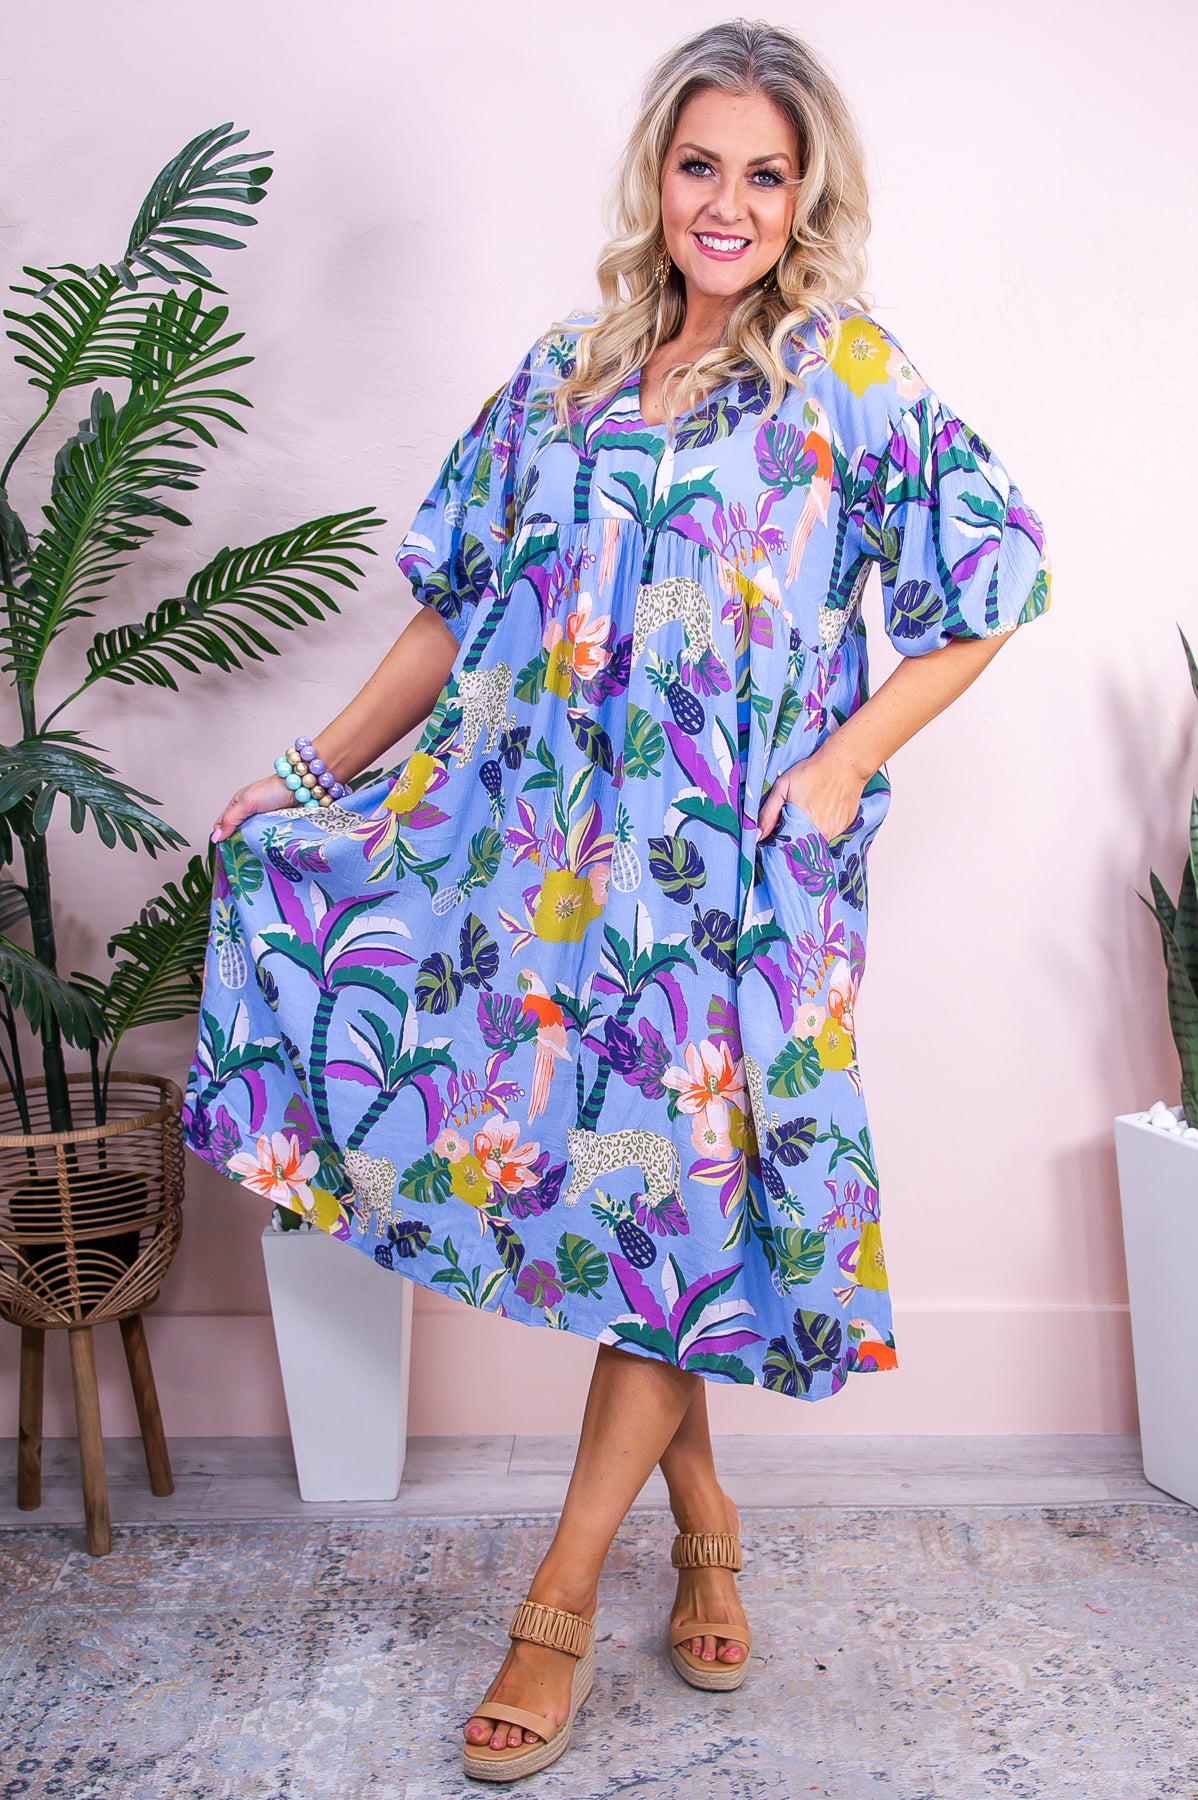 Dreaming Of Paradise Periwinkle/Multi Color Floral/Printed Dress - D5214PW